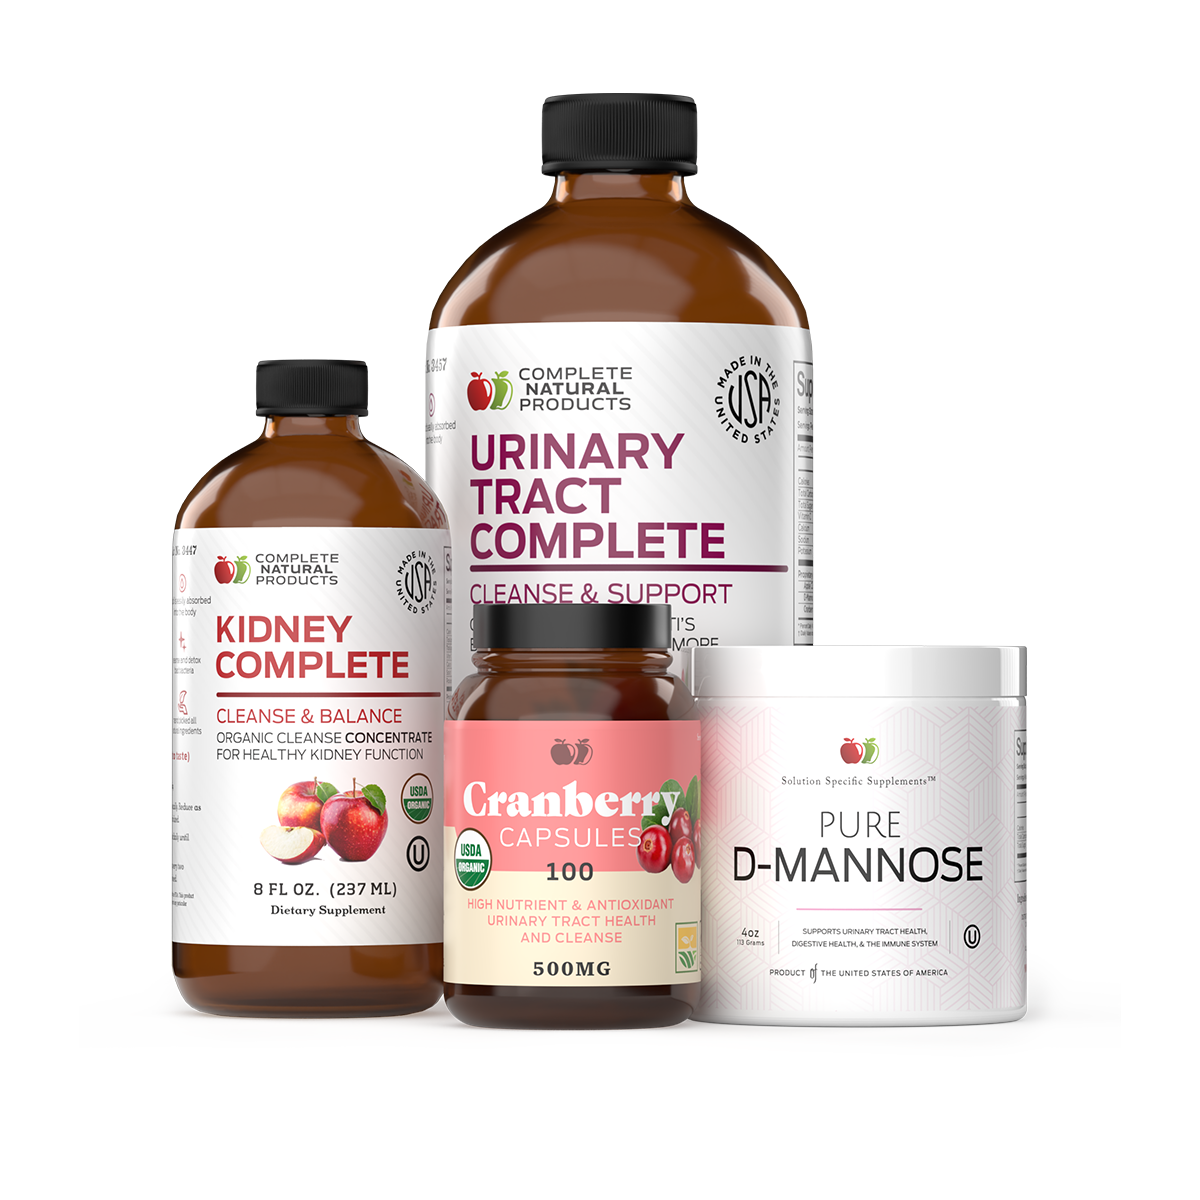 Urinary Tract Complete Bundle